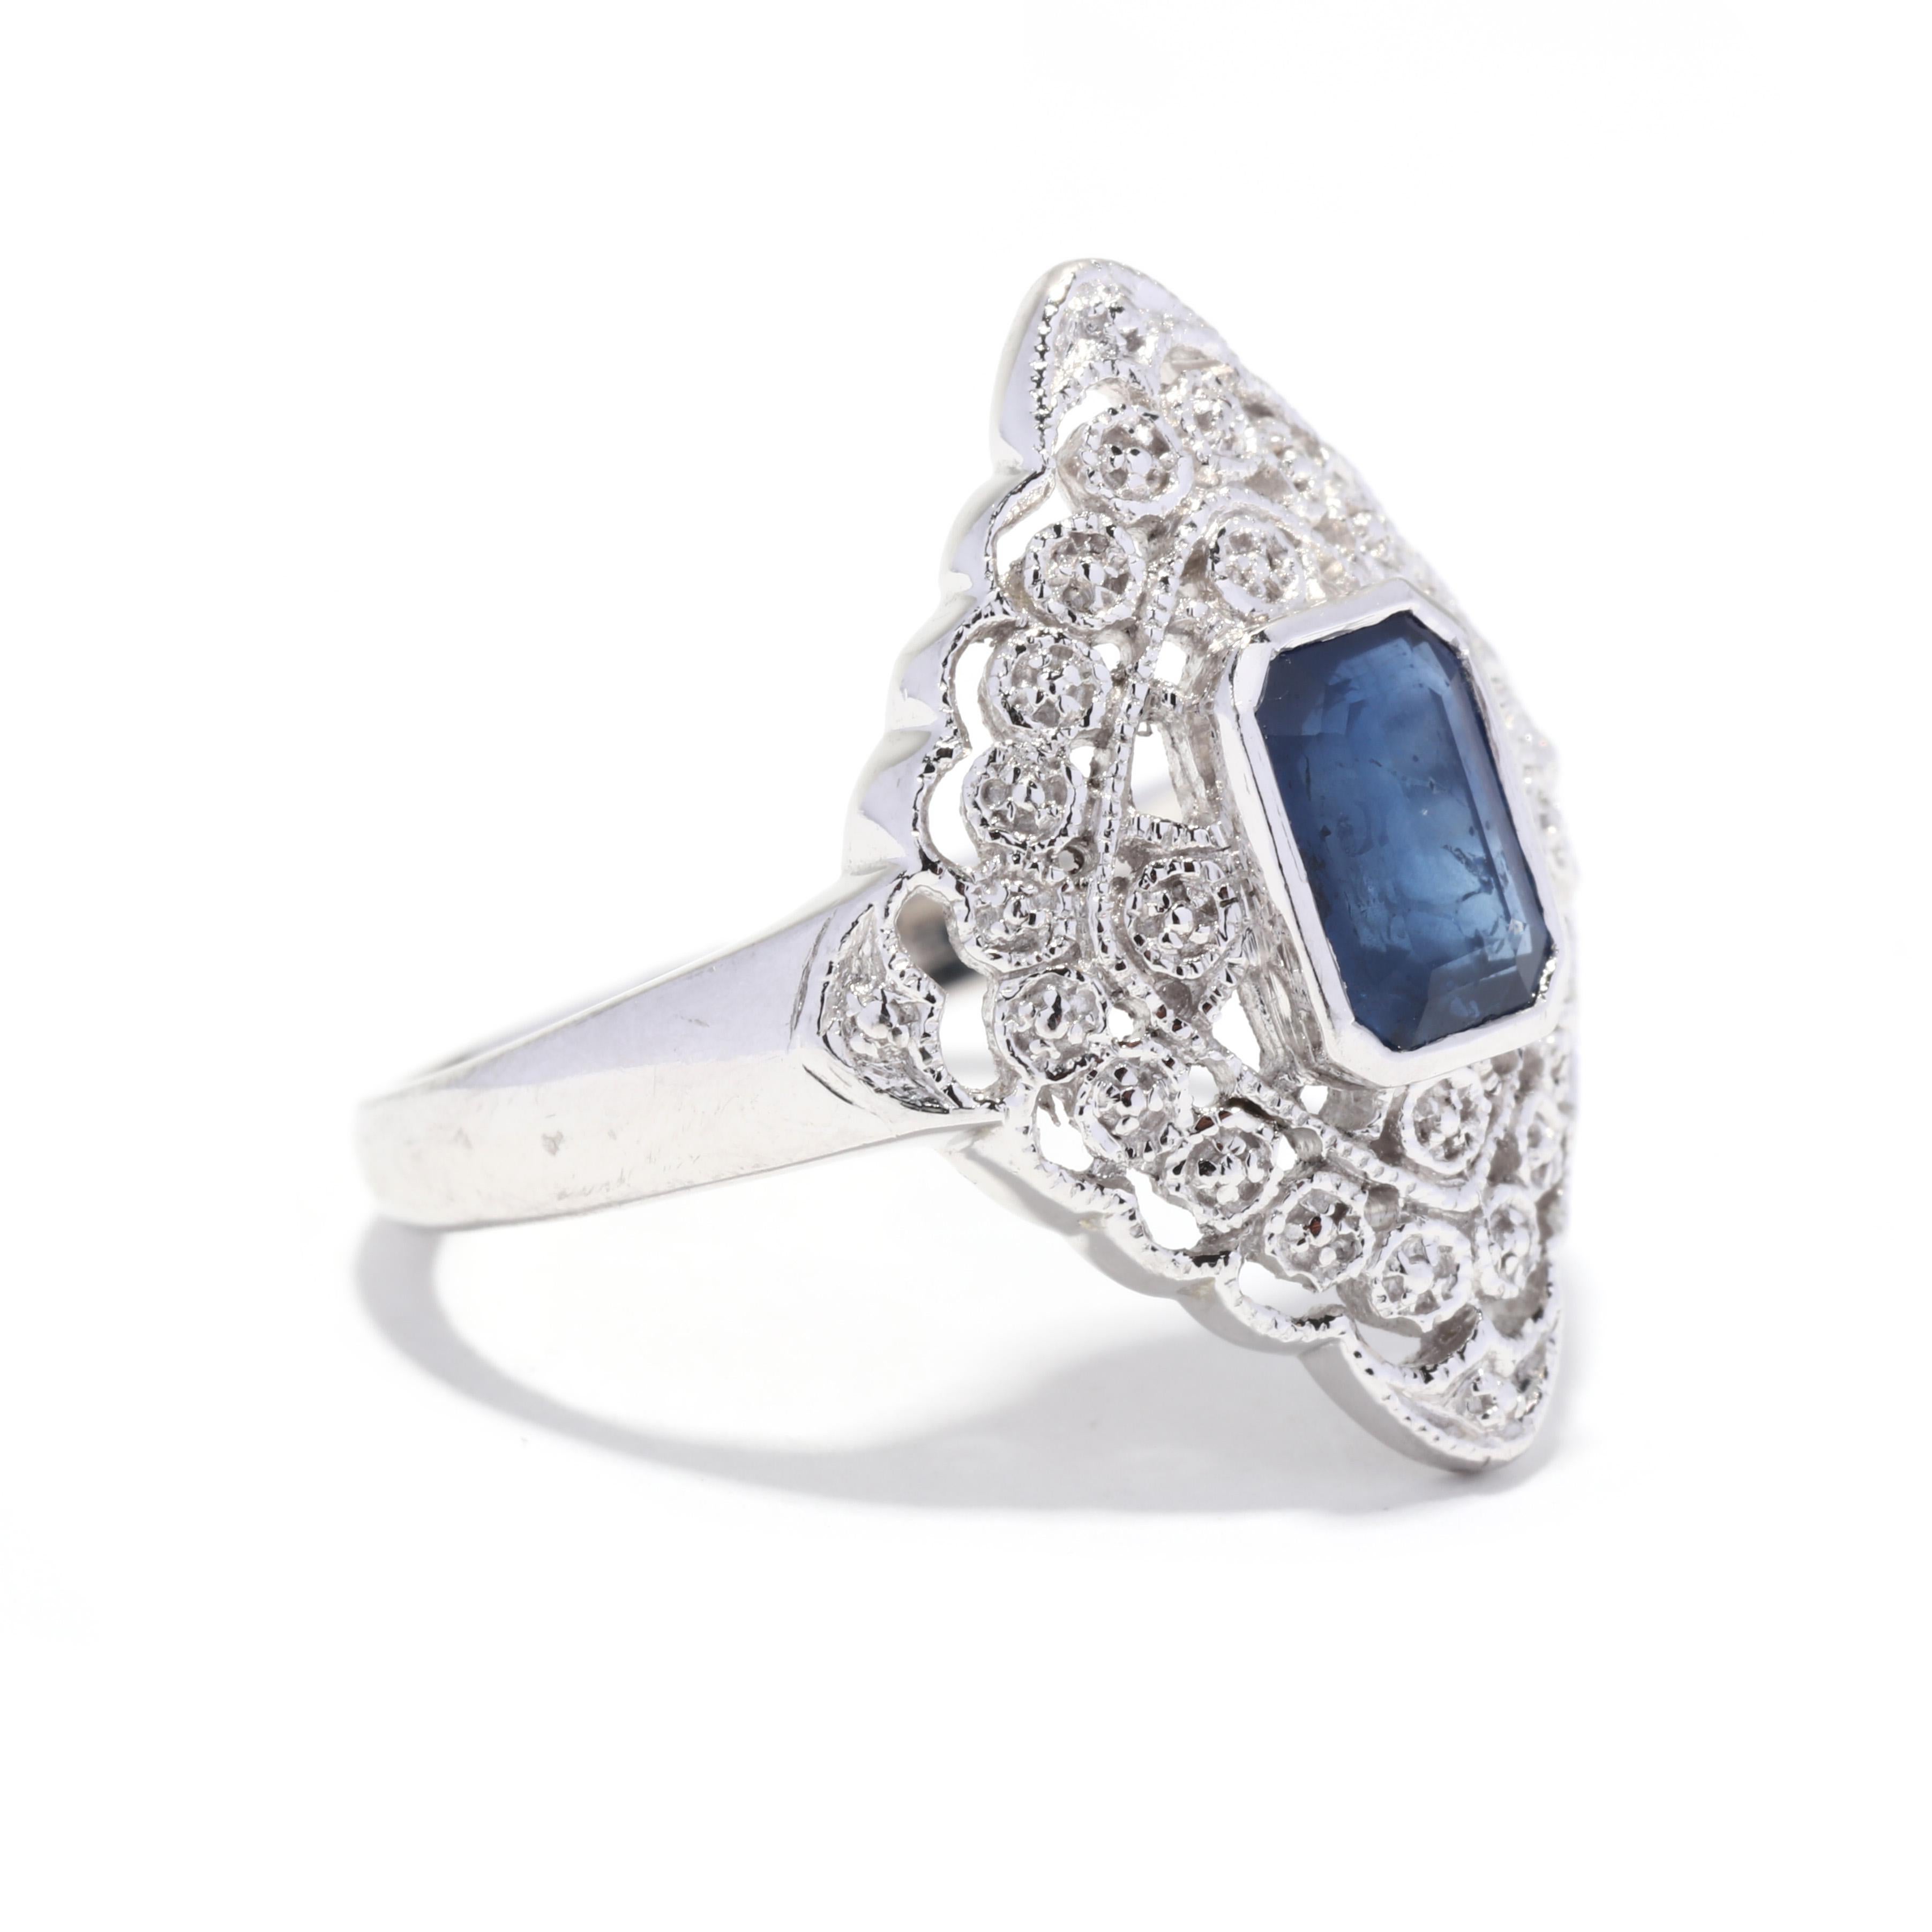 A vintage platinum sapphire navette ring. This large statement ring features a bezel set, emerald cut sapphire weighing approximately 1.30 carat, set in a navette shape ring with engraved, milgrain foliate and scalloped detailing.

Stones:
-